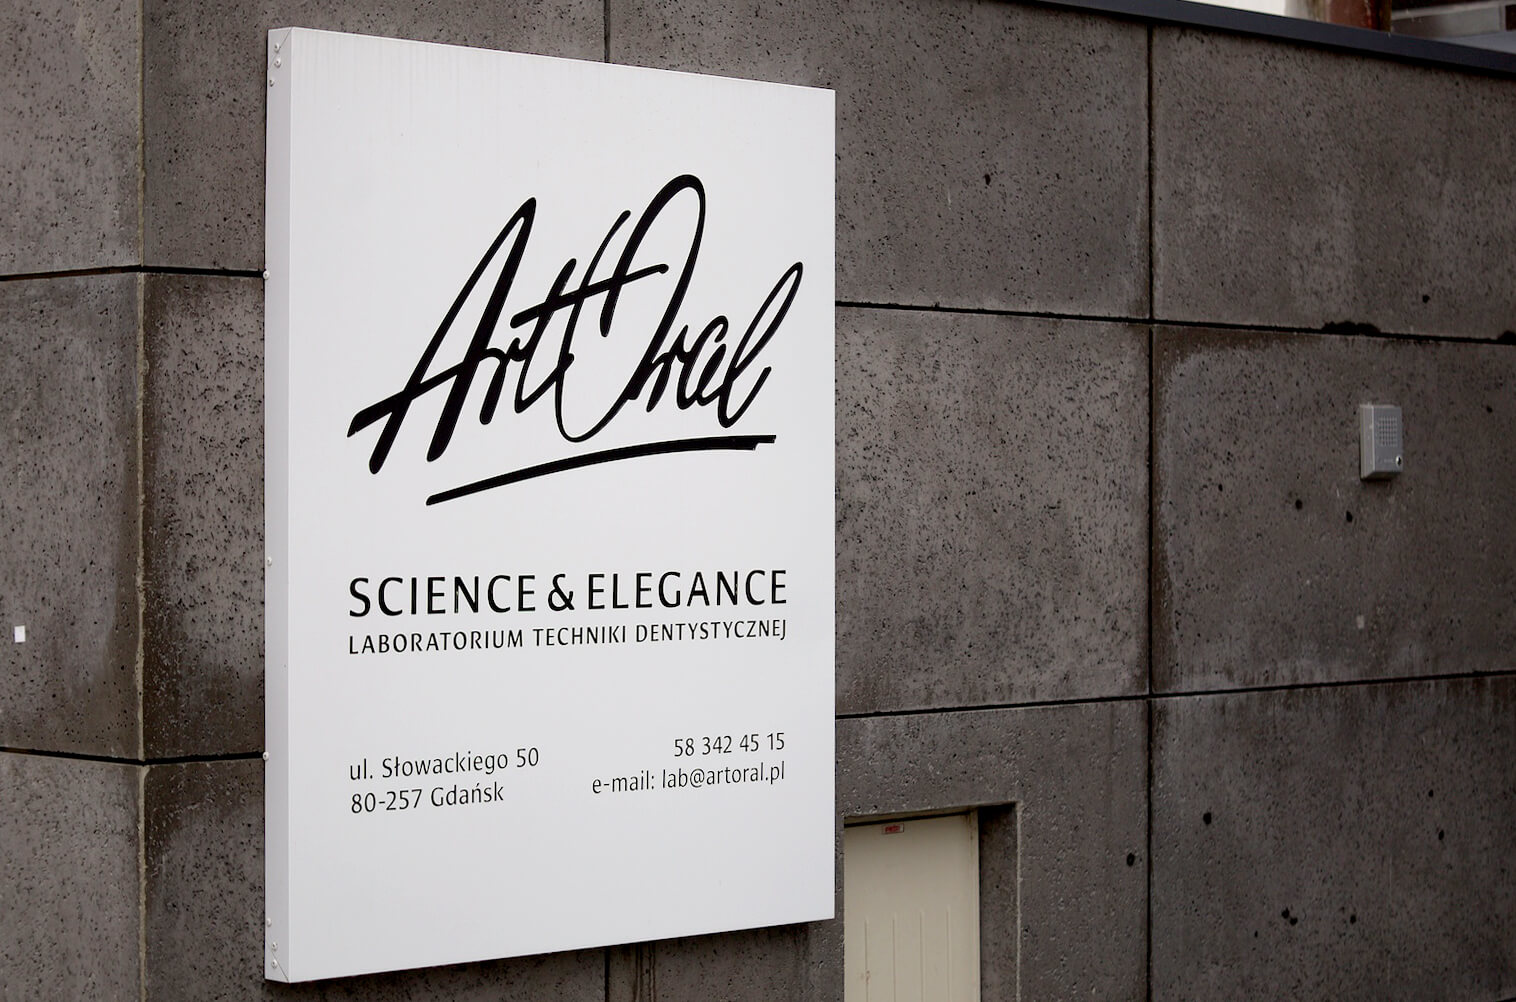 Art Oral - Art Oral - company advertising coffer, signboard over the entrance